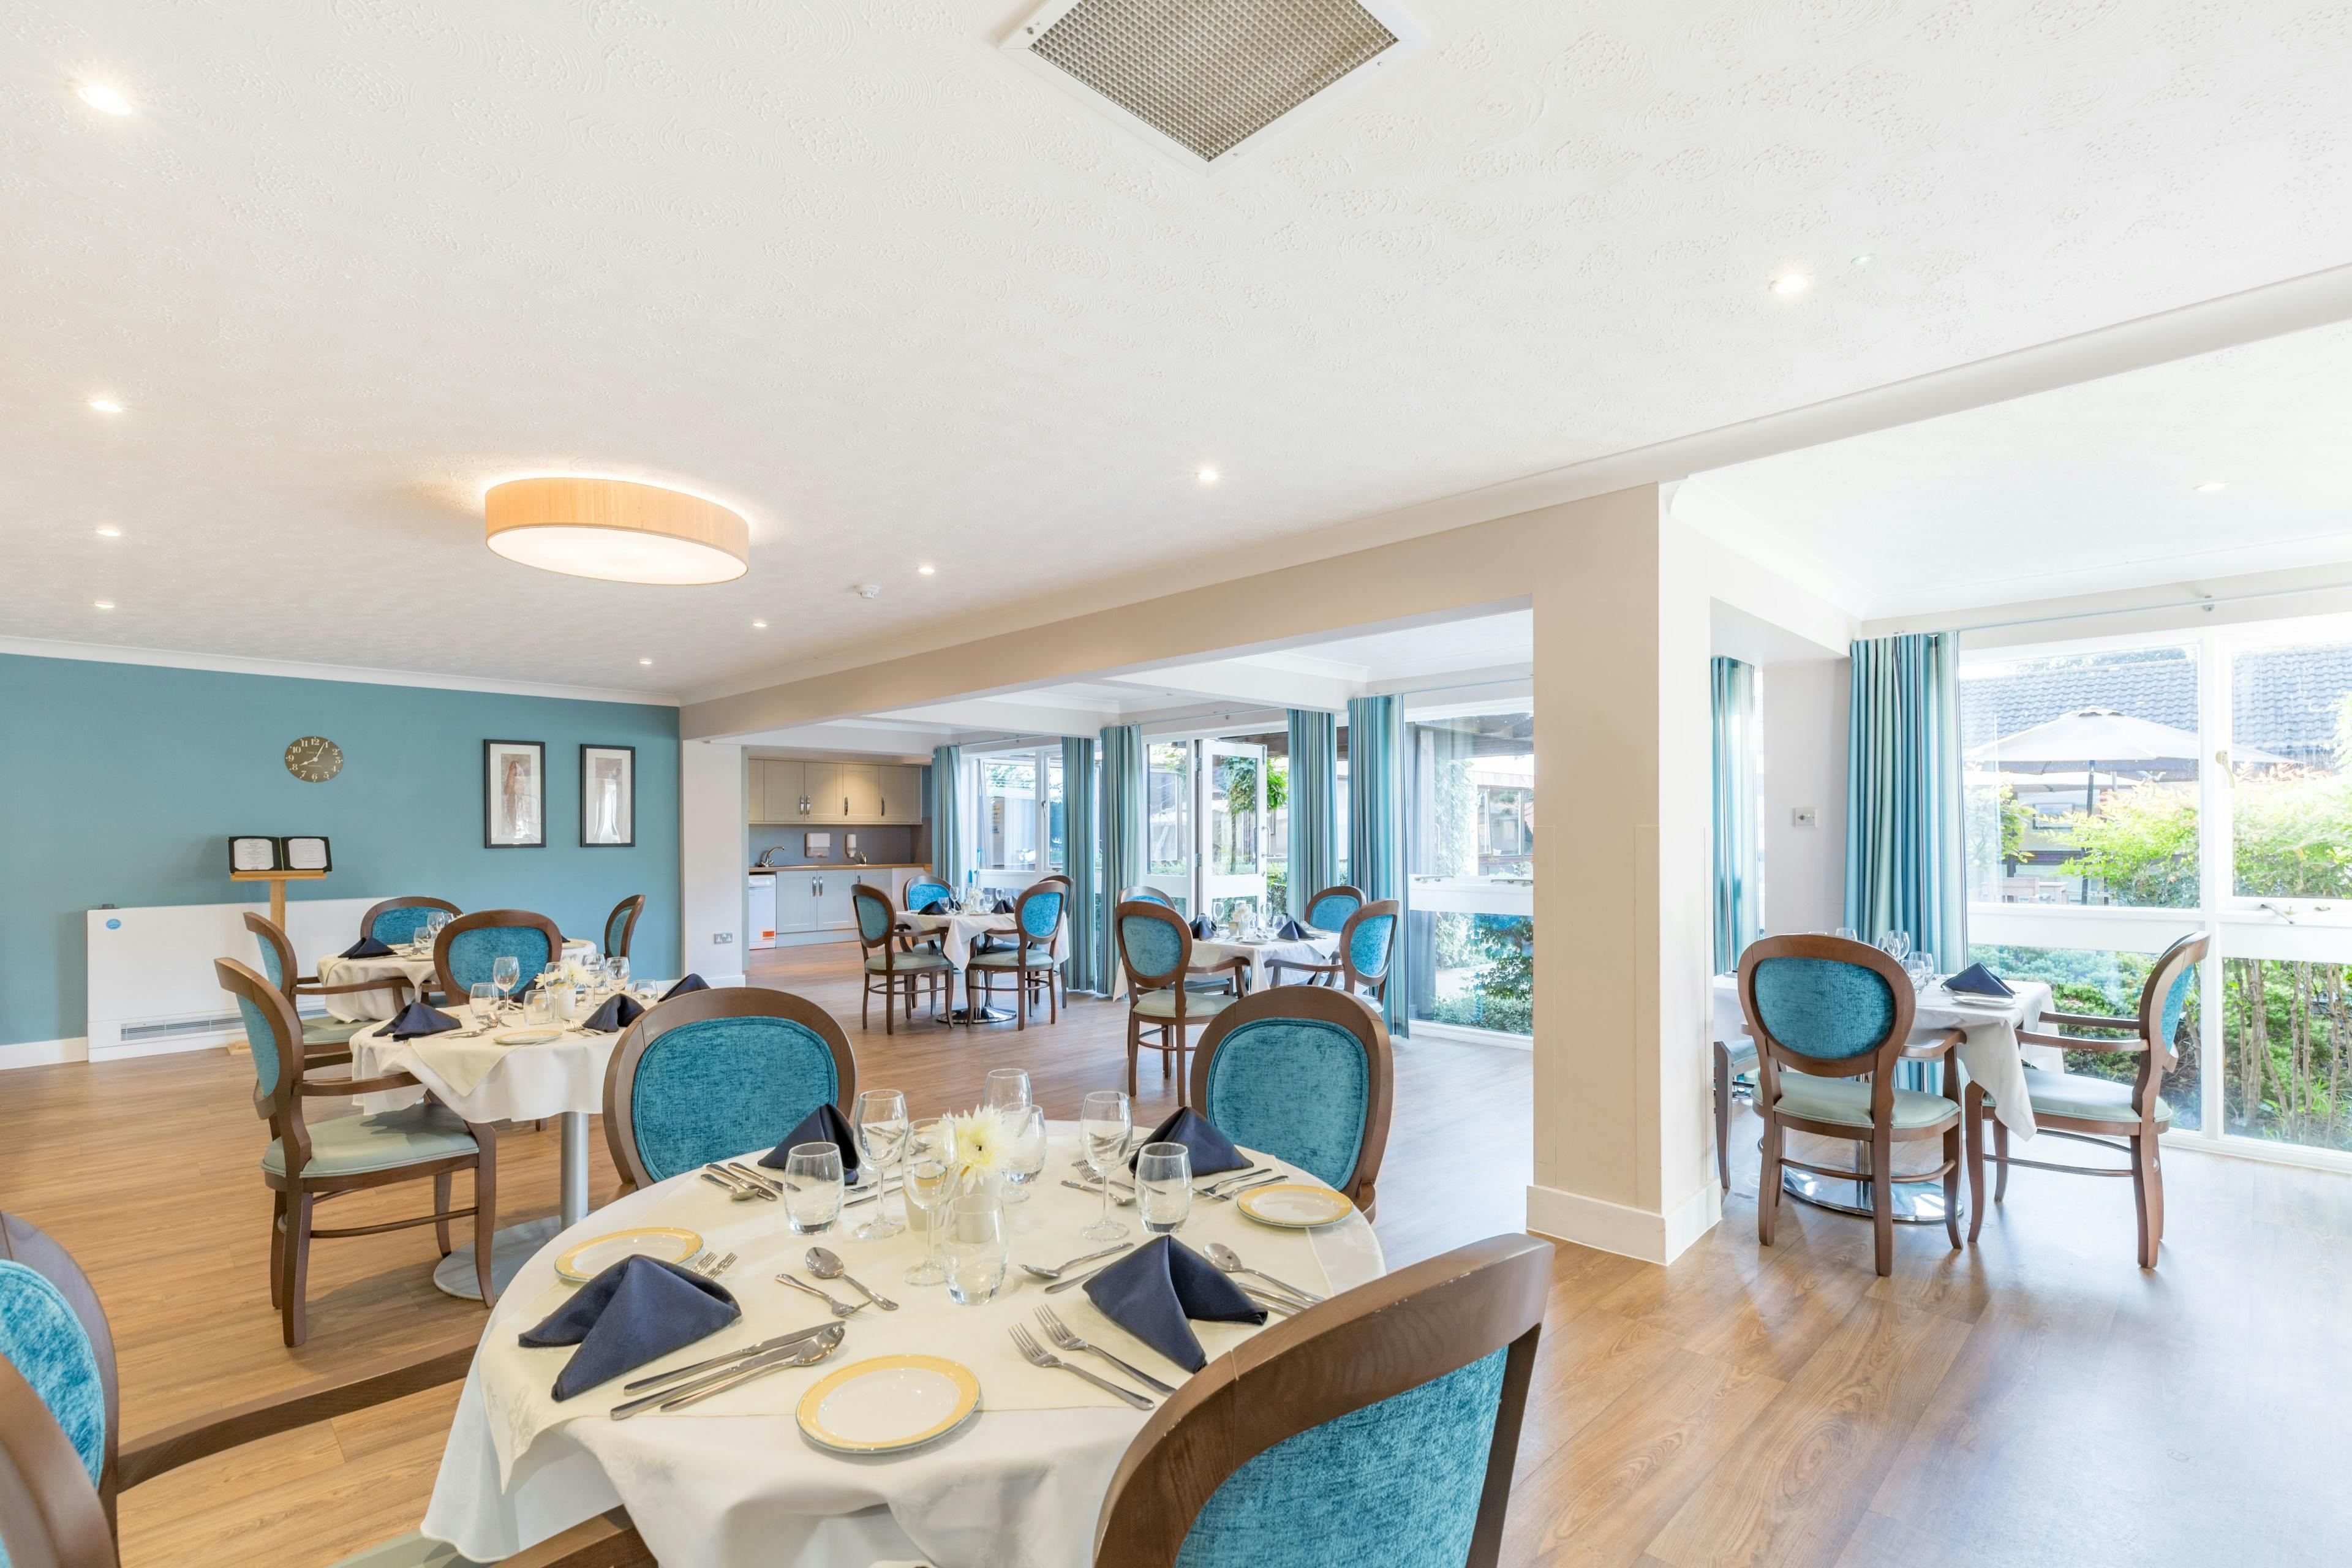 Dining Room at Leonard Lodge Care Home in Brentwood, Essex